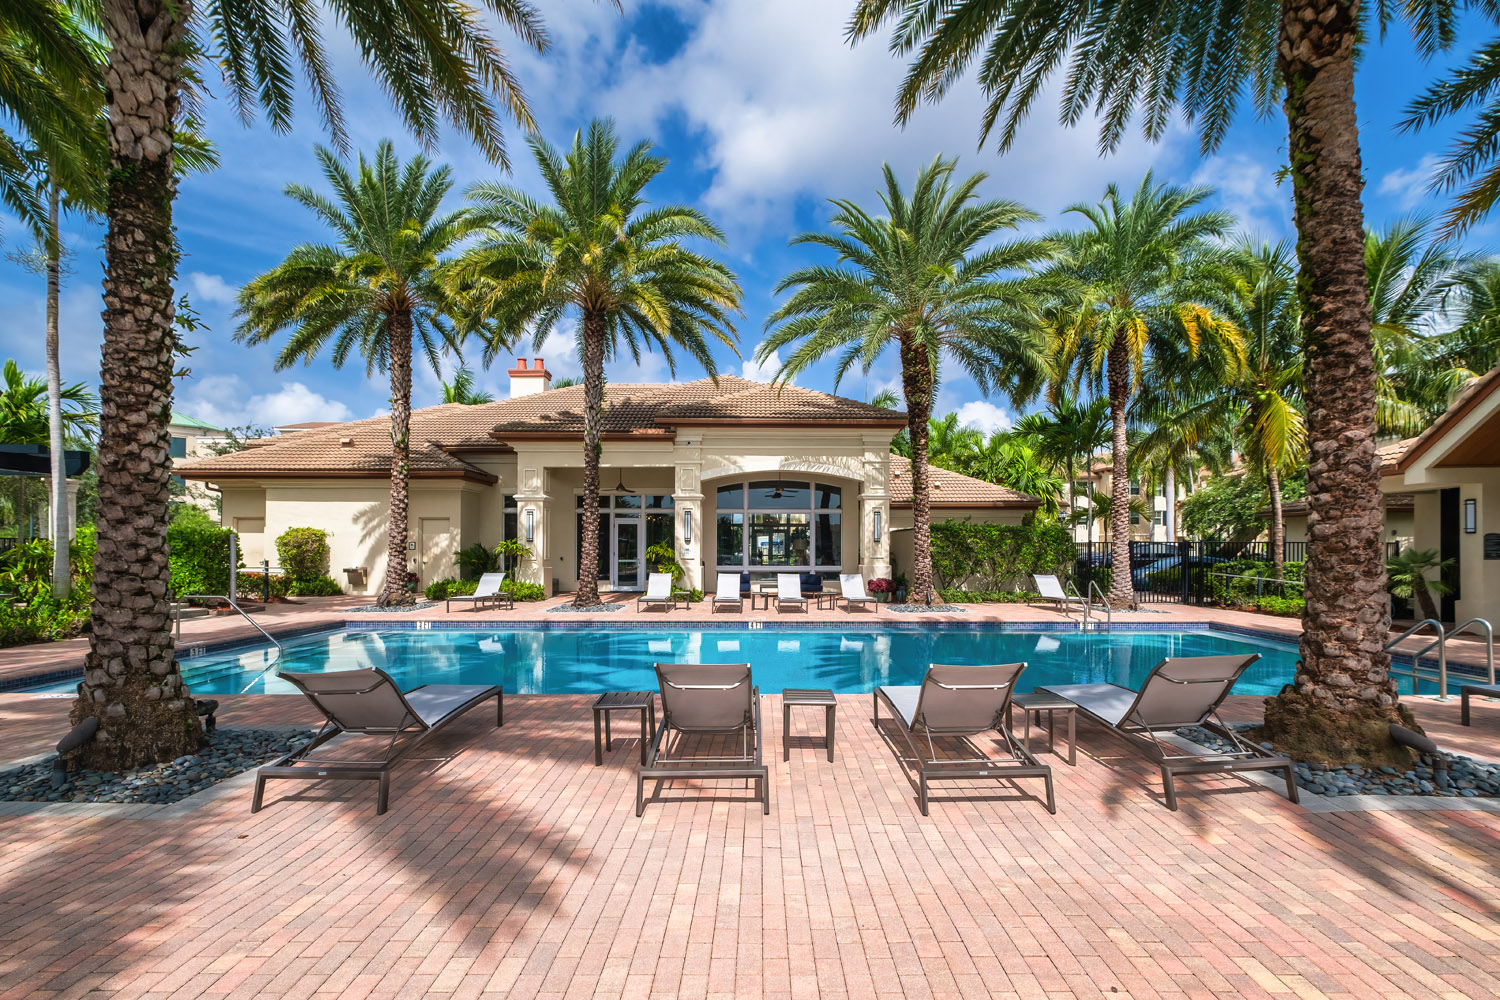 Solaire at Coconut Creek - The Multifamily Advisory Group at 